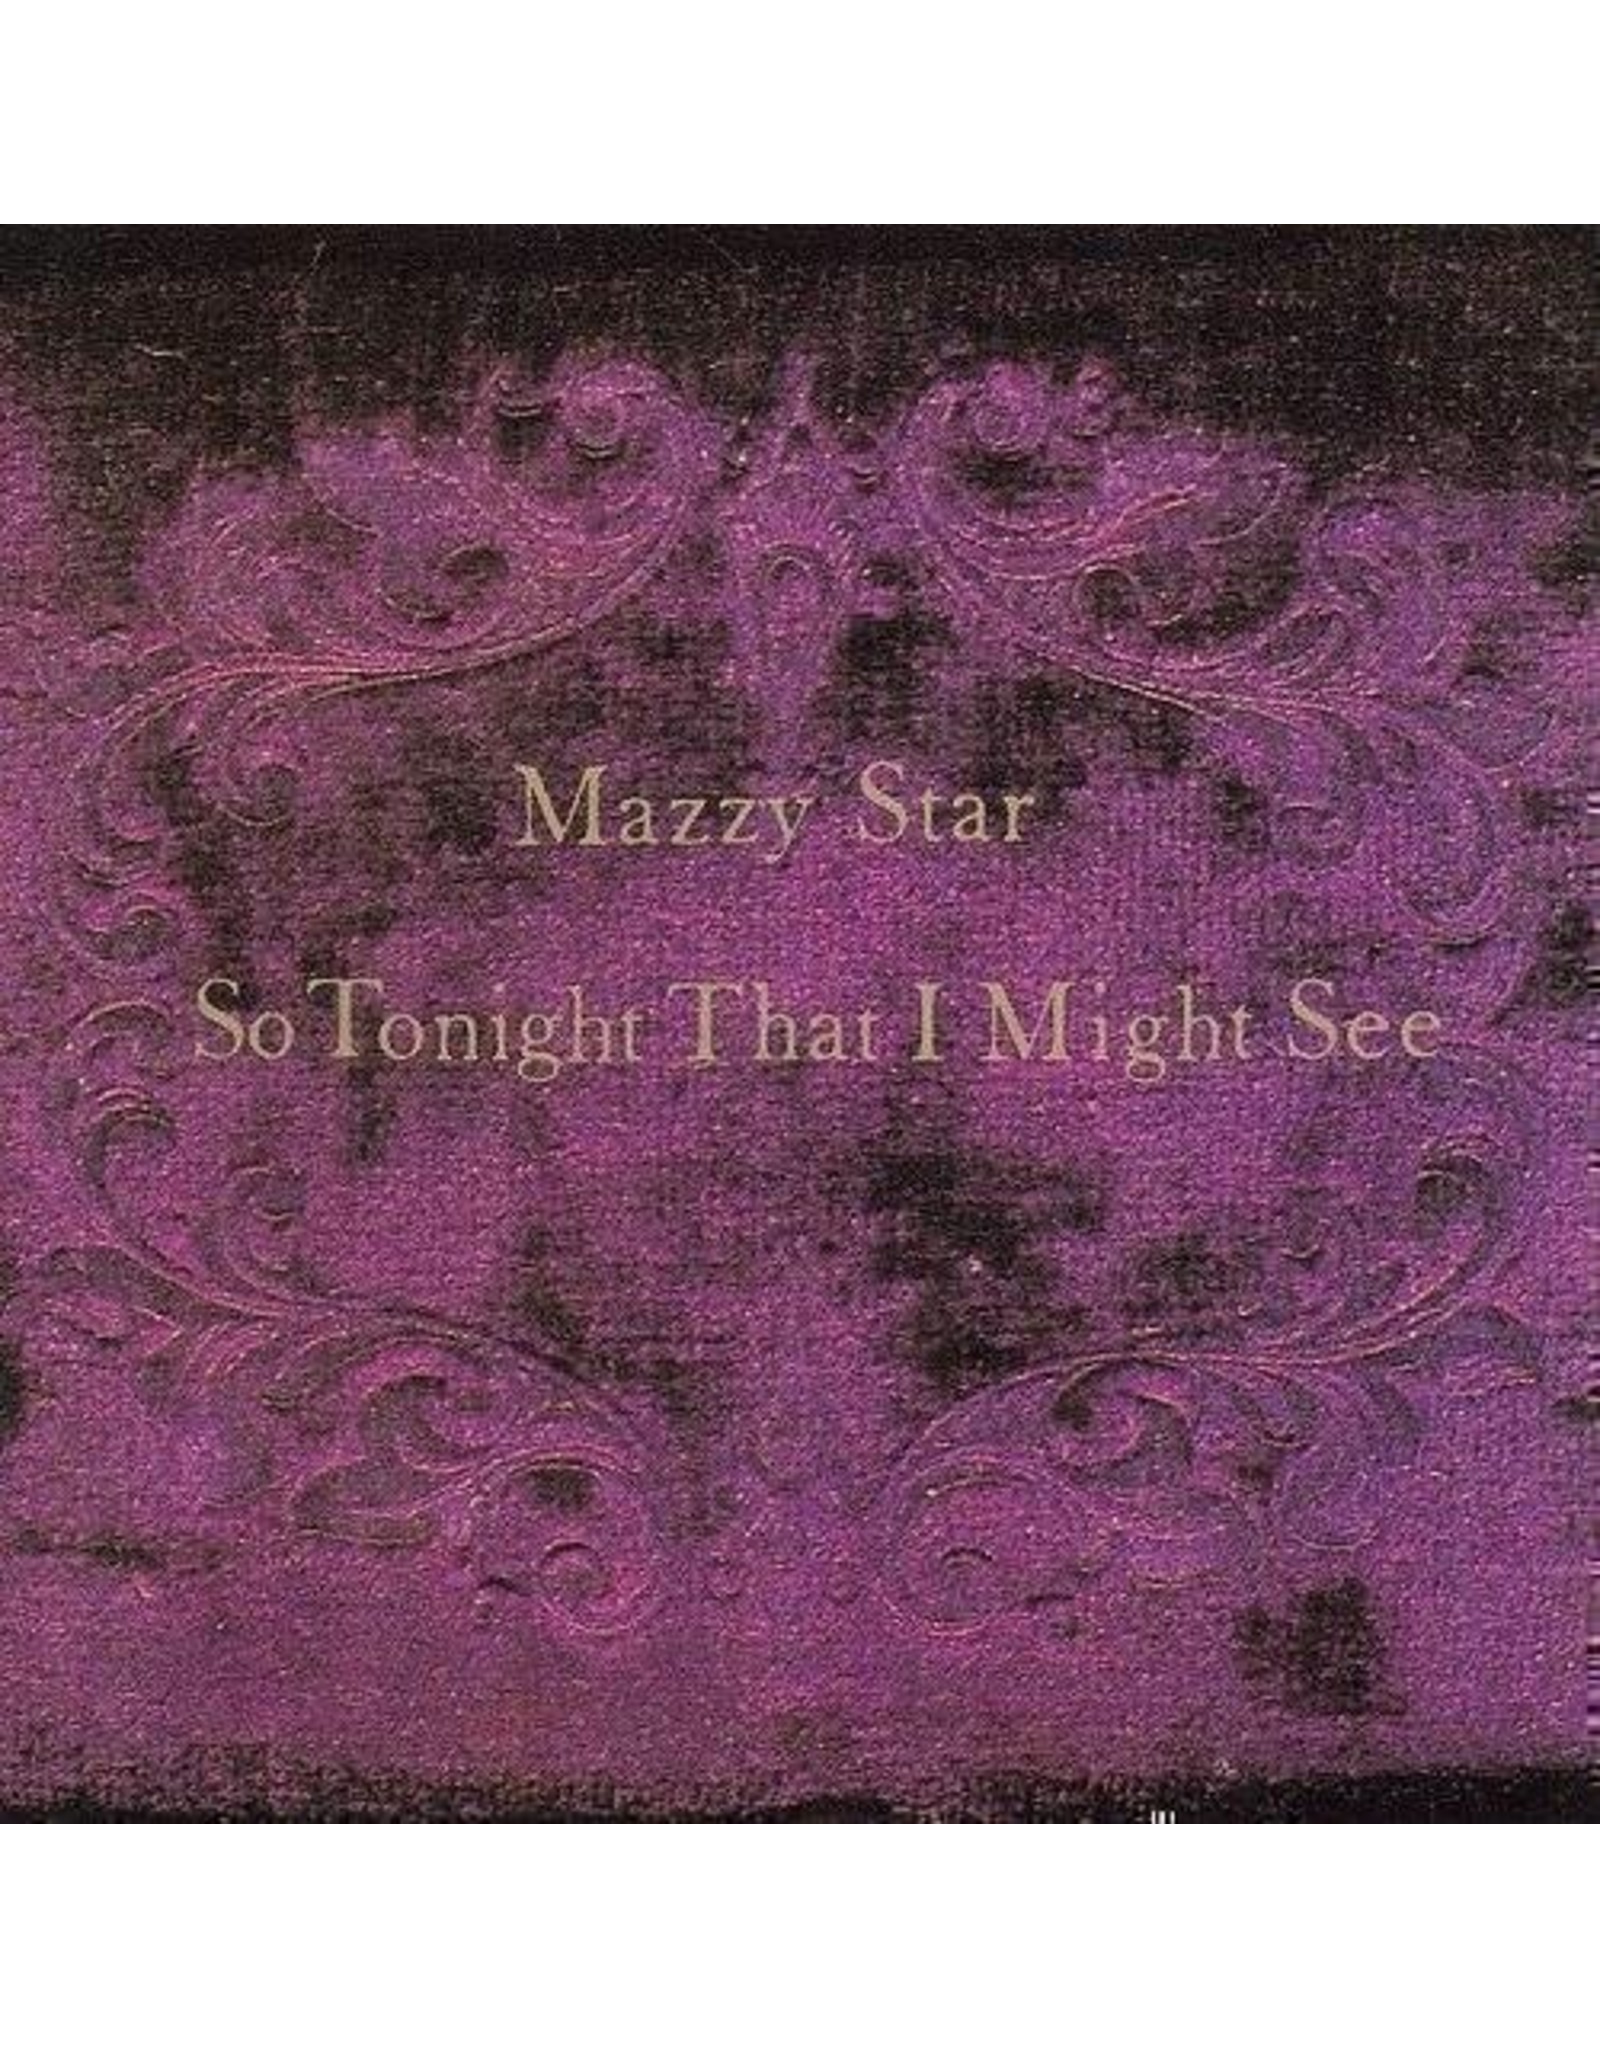 New Vinyl Mazzy Star - So Tonight That I Might See LP